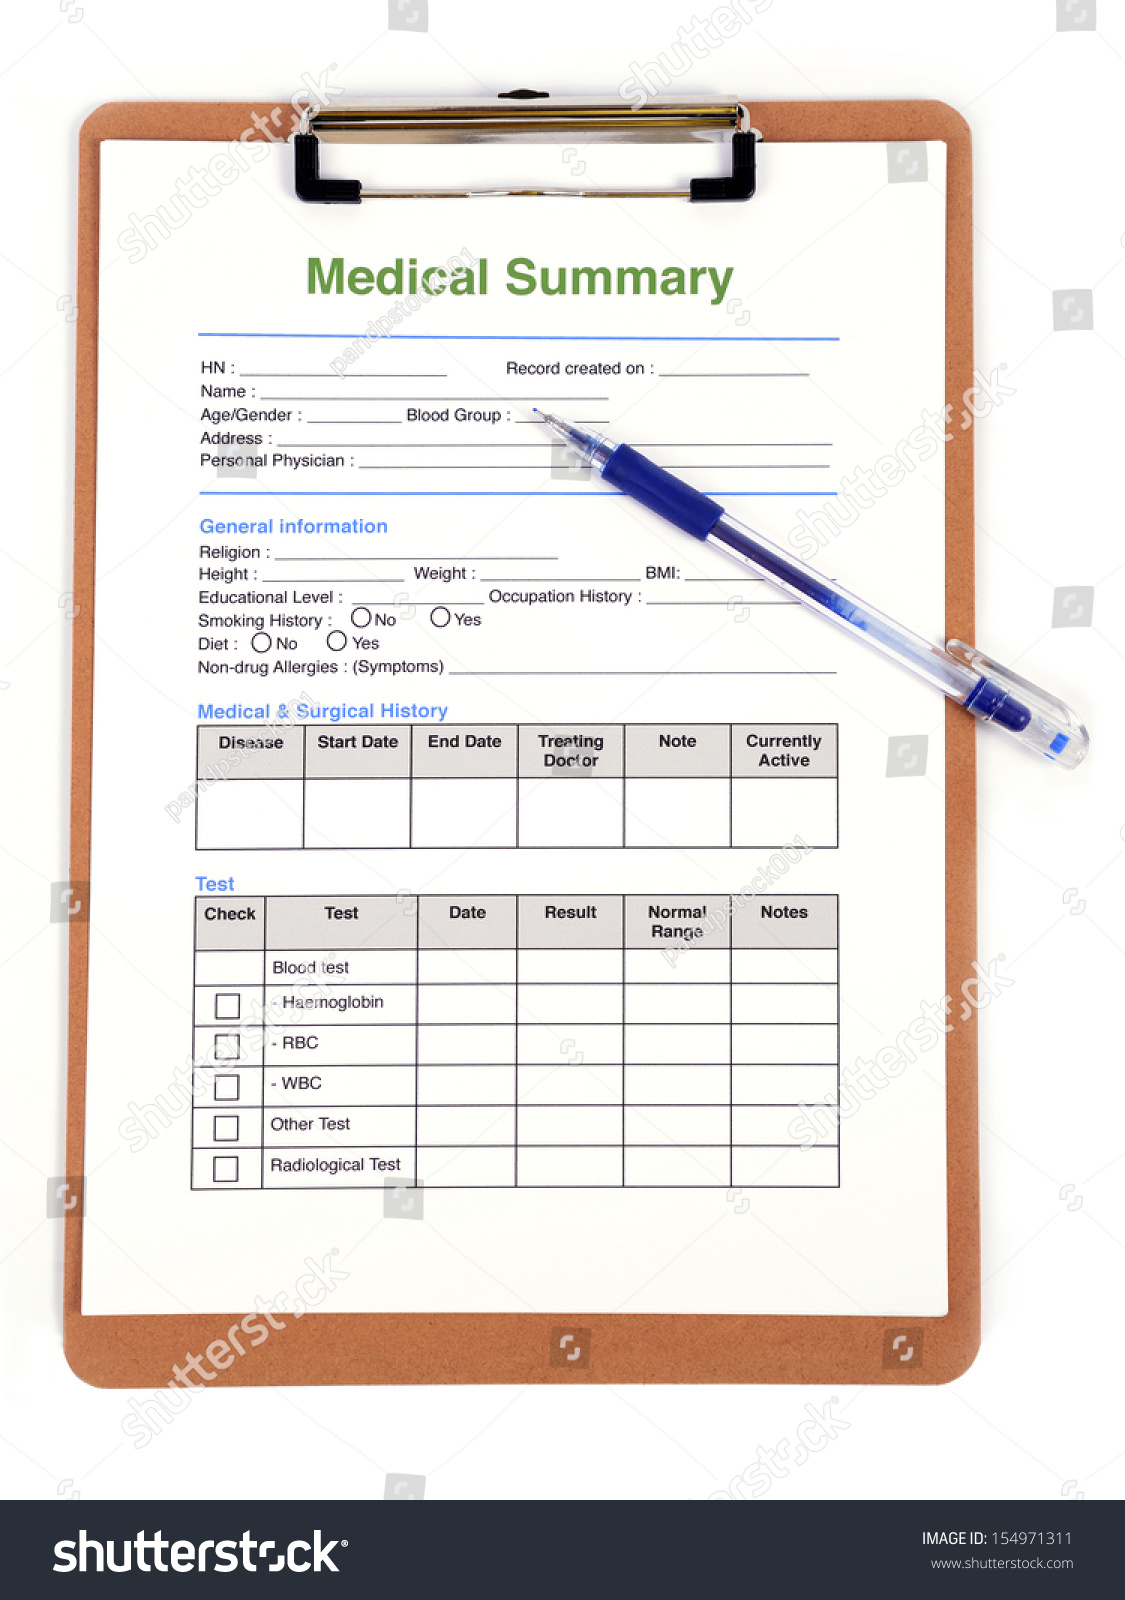 Personal Medical Record Template from image.shutterstock.com